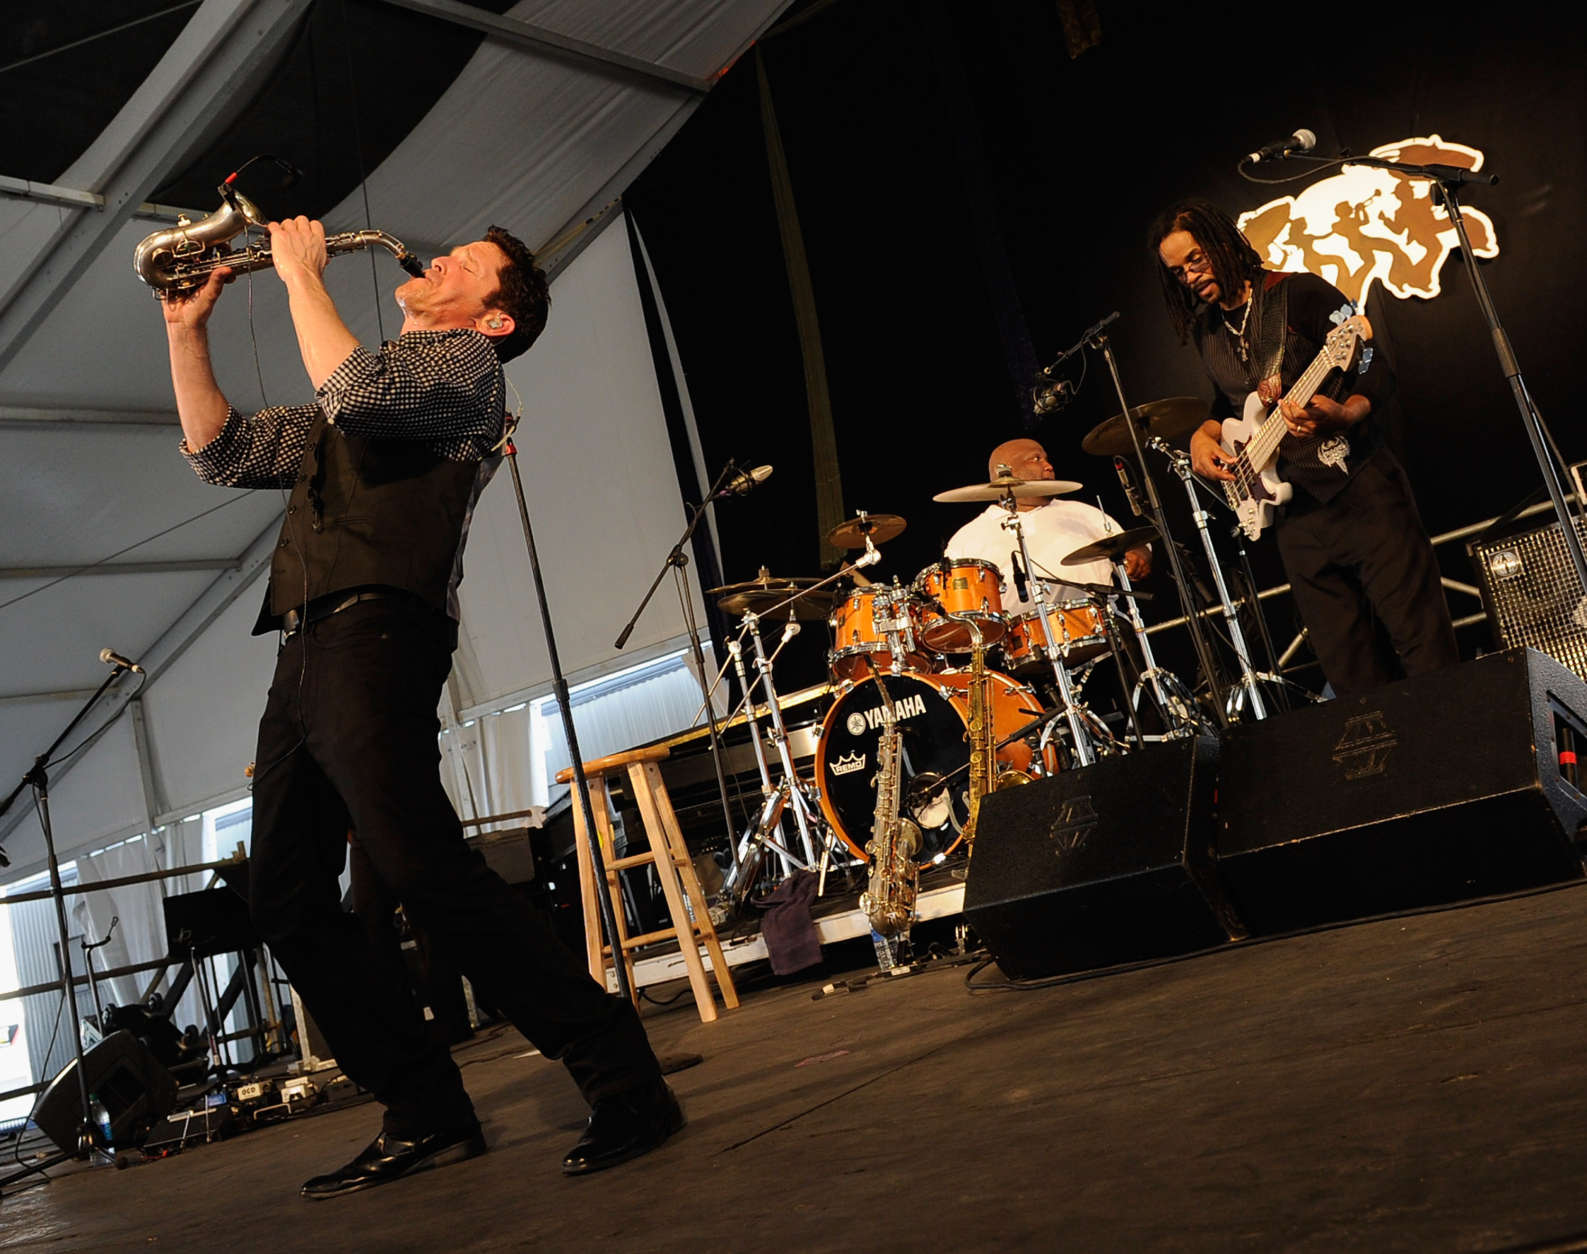 NEW ORLEANS, LA - APRIL 28:  Dave Koz performs during the 2012 New Orleans Jazz &amp; Heritage Festival Day 2 at the Fair Grounds Race Course on April 28, 2012 in New Orleans, Louisiana.  (Photo by Rick Diamond/Getty Images)